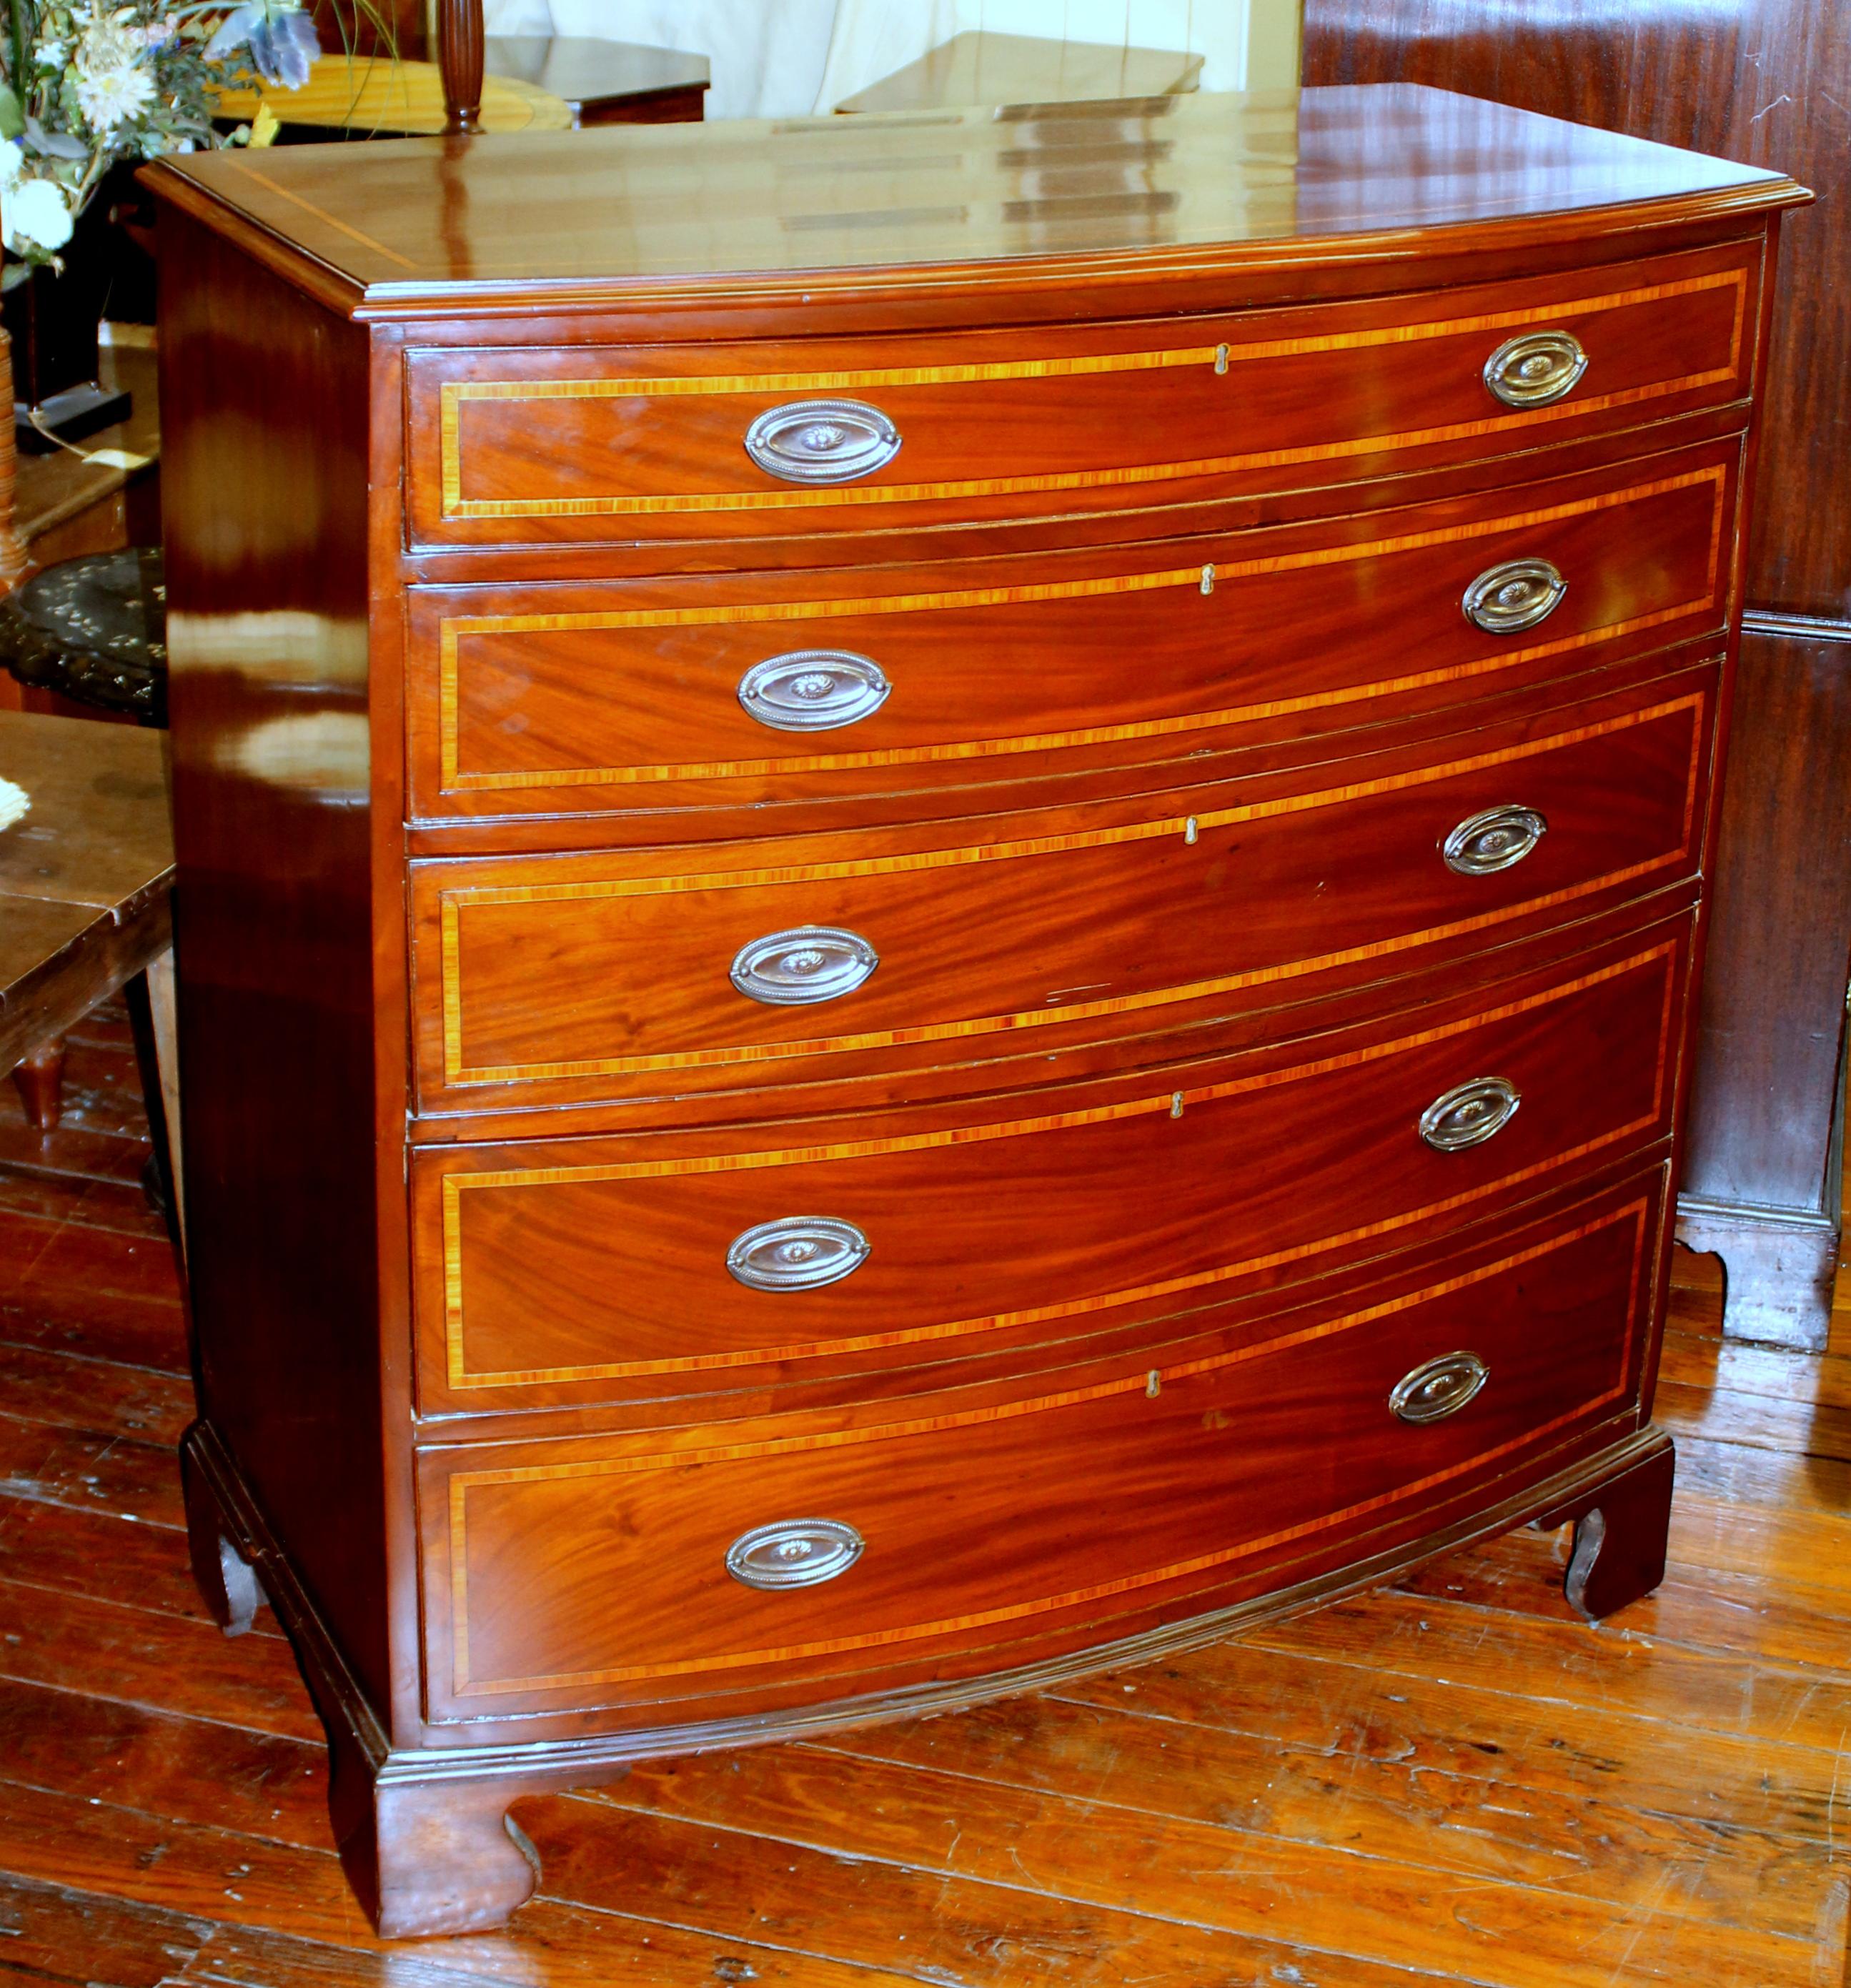 Rare and fine antique English George IV tulipwood tall inlaid mahogany bow-front chest of drawers with five rare, wide graduated drawers (sometimes known as a 